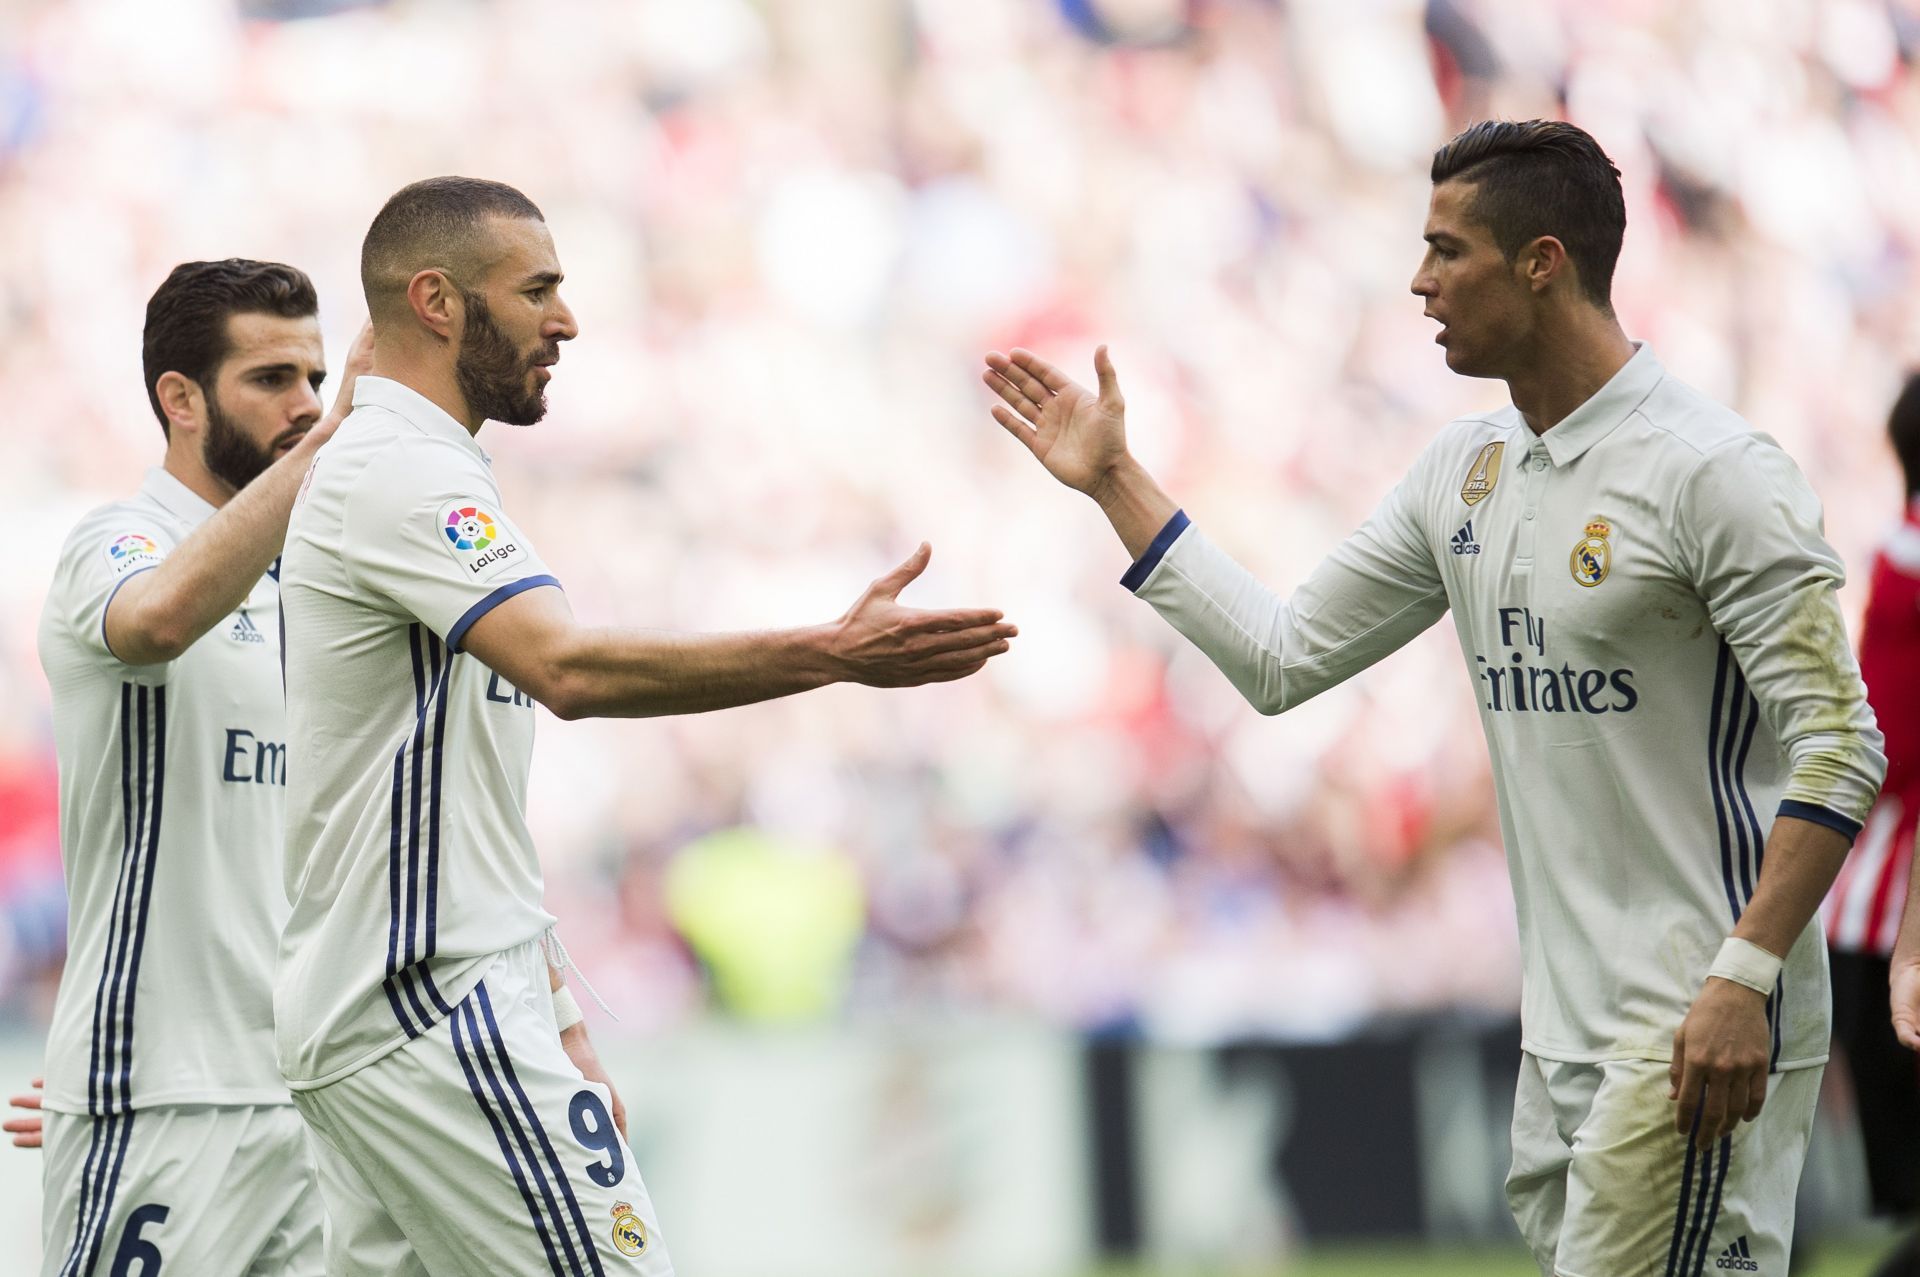 Karim Benzema has more goals than both Cristiano Ronaldo and Lionel Messi have this season